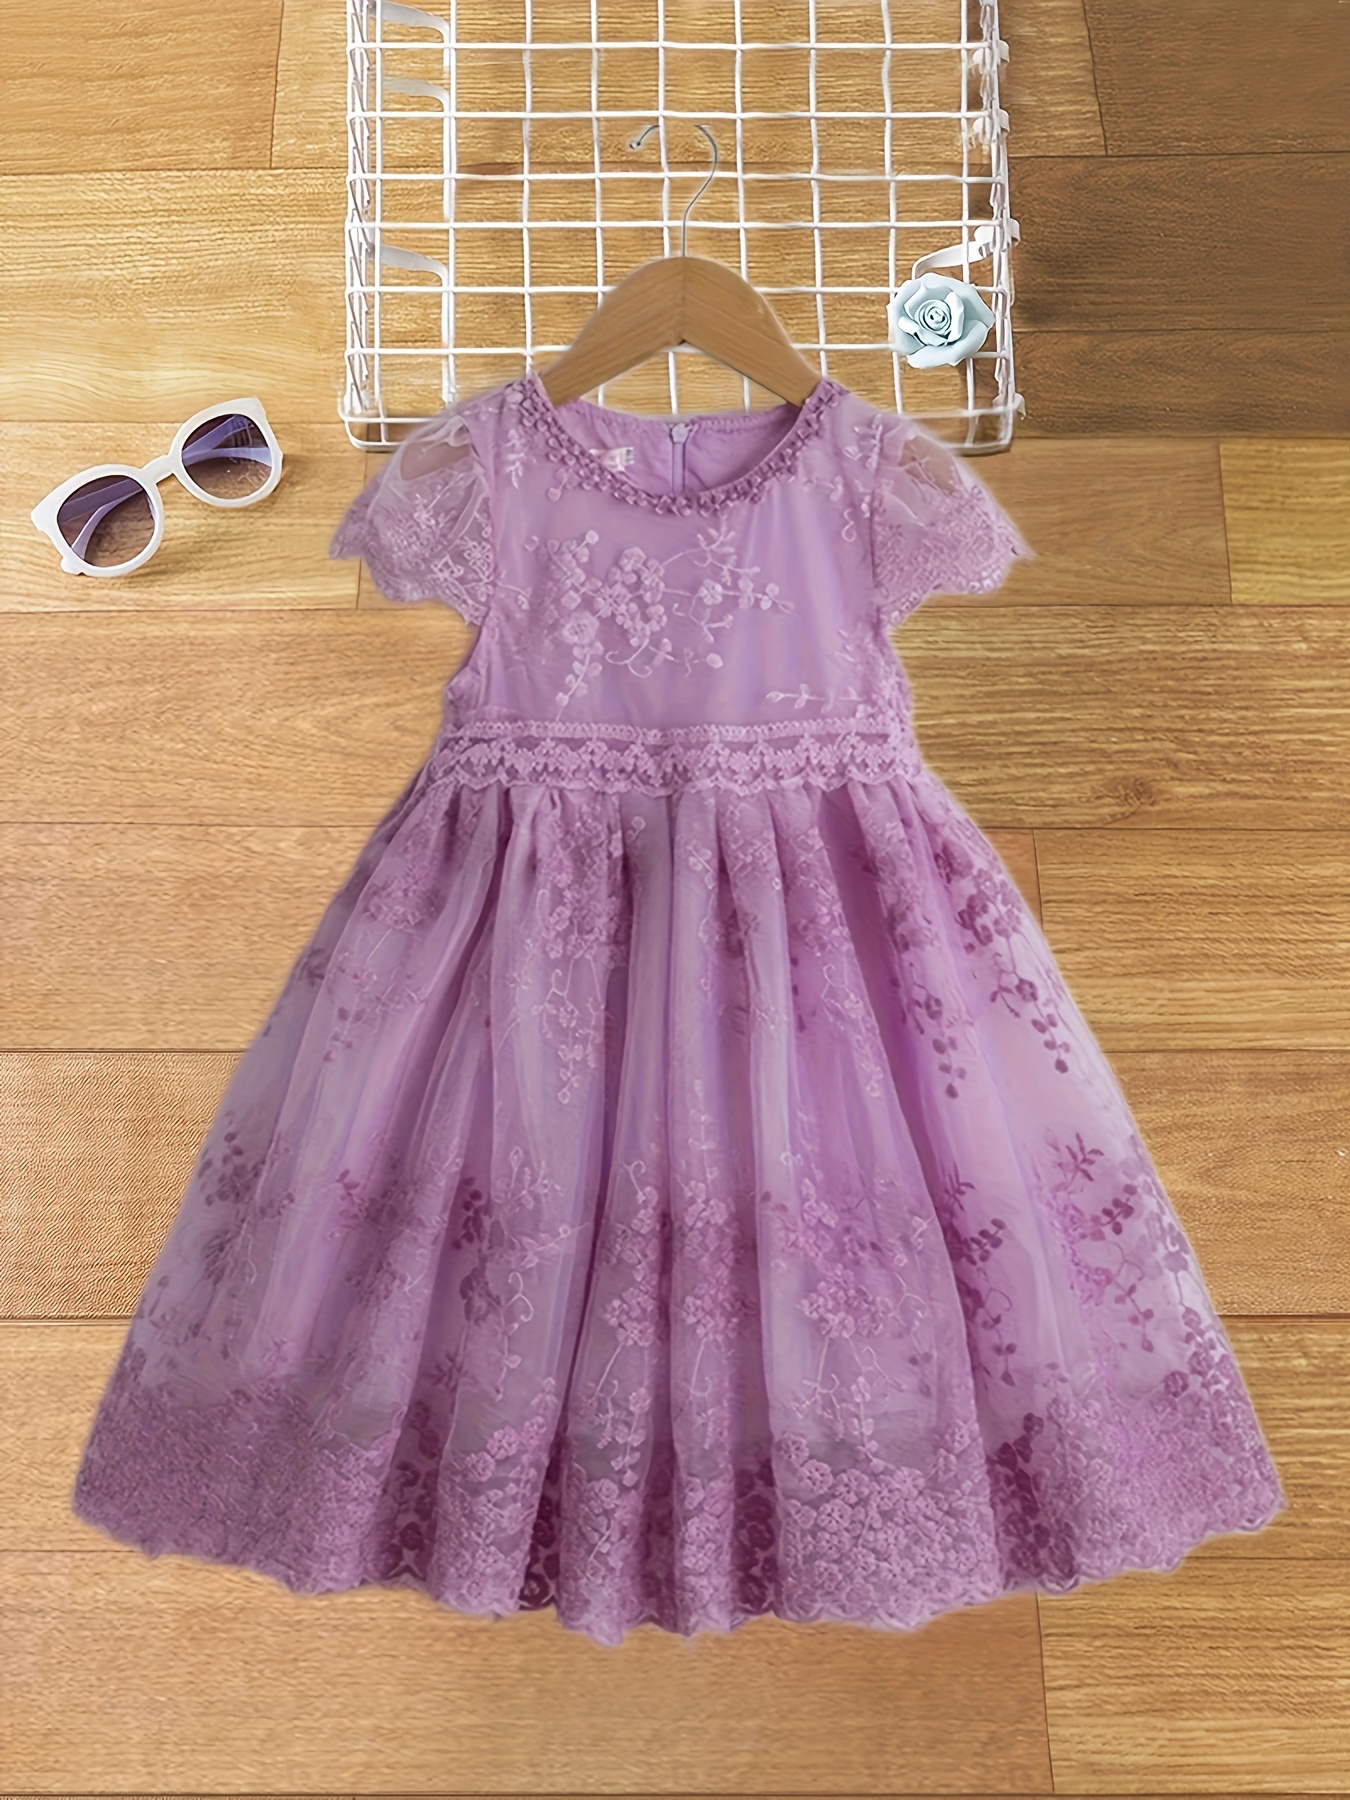 Girls Casual Flower Embroidery Short Sleeve Dress Elegant Mesh Dress For Summer Party Gift Holiday